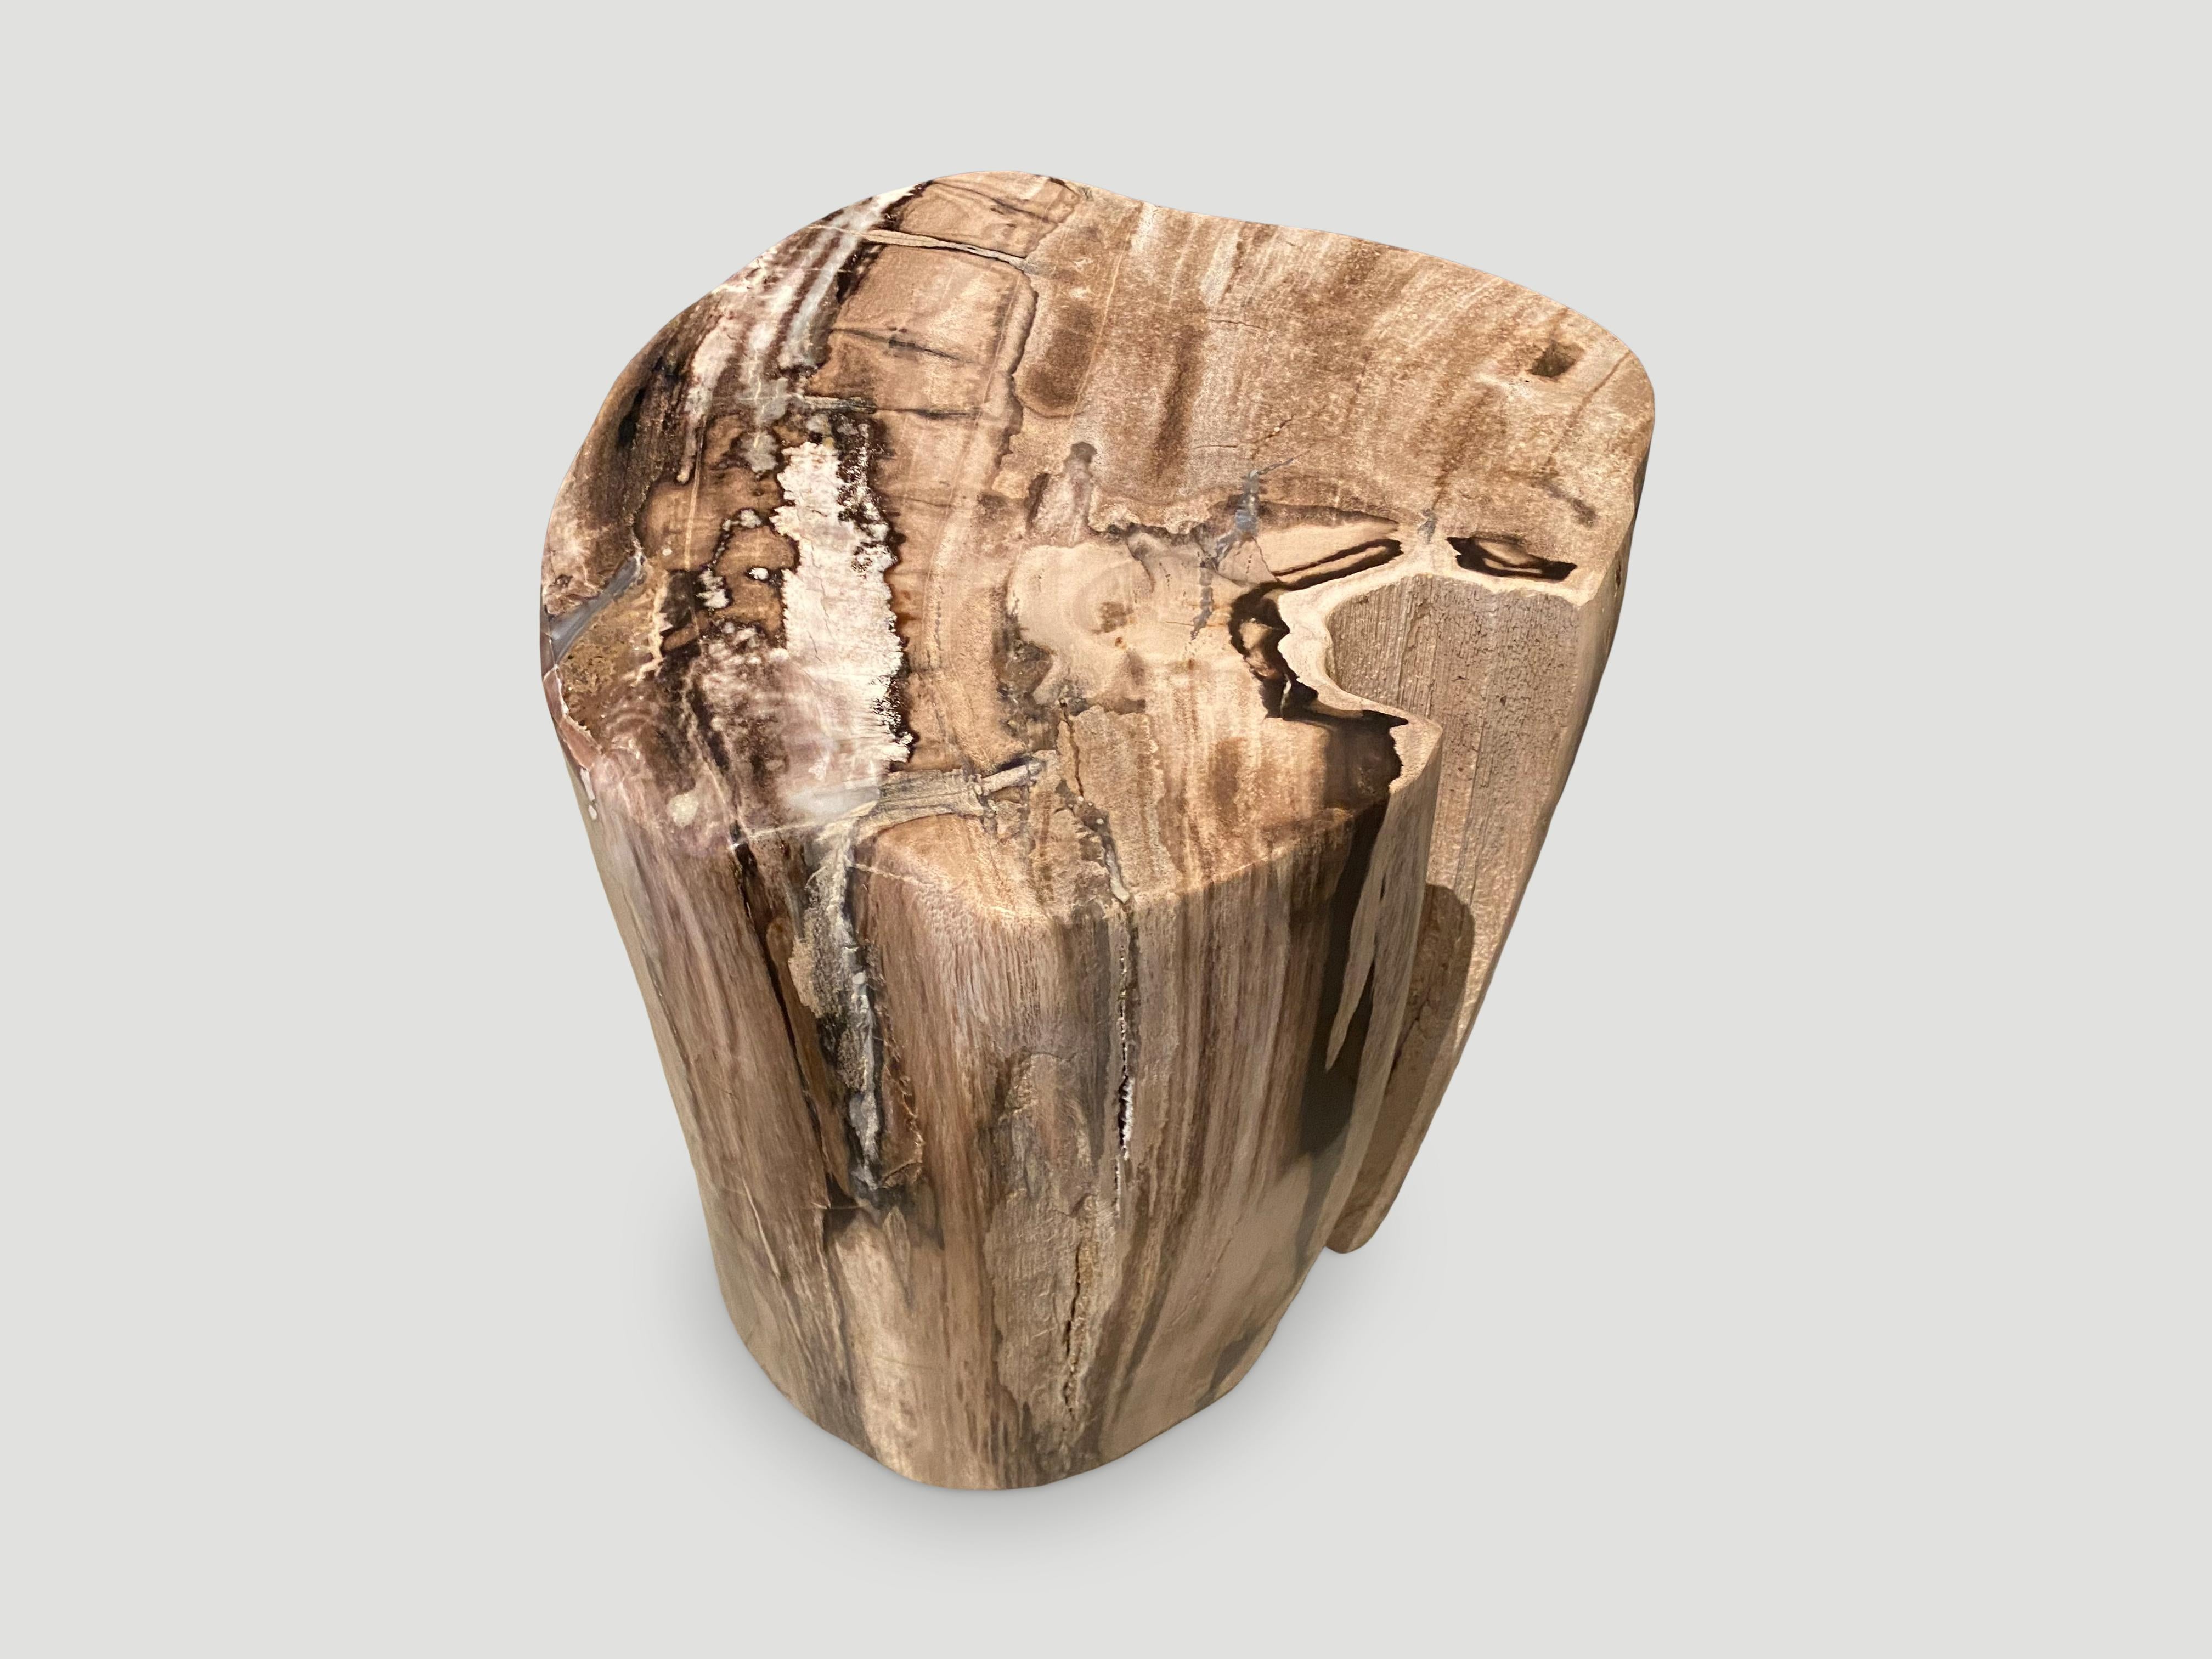 Stunning rare tones with beautiful markings in this petrified wood side table. It’s fascinating how Mother Nature produces these exquisite 40 million year old petrified teak logs with such contrasting colors and natural patterns throughout. Modern